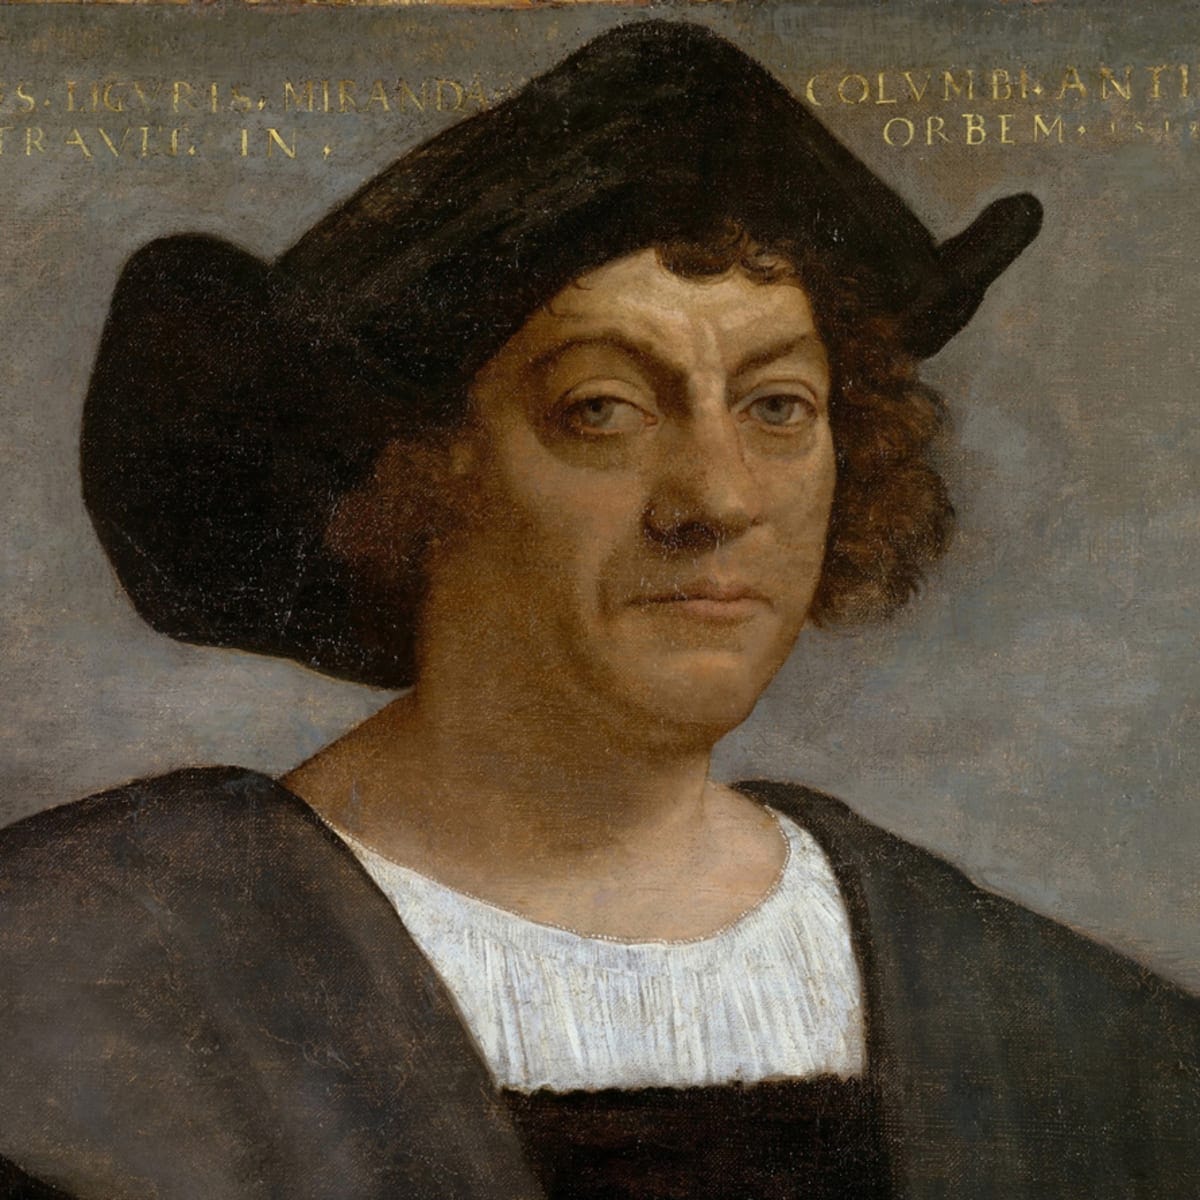 Christopher Columbus - Facts, Voyage & Discovery - HISTORY